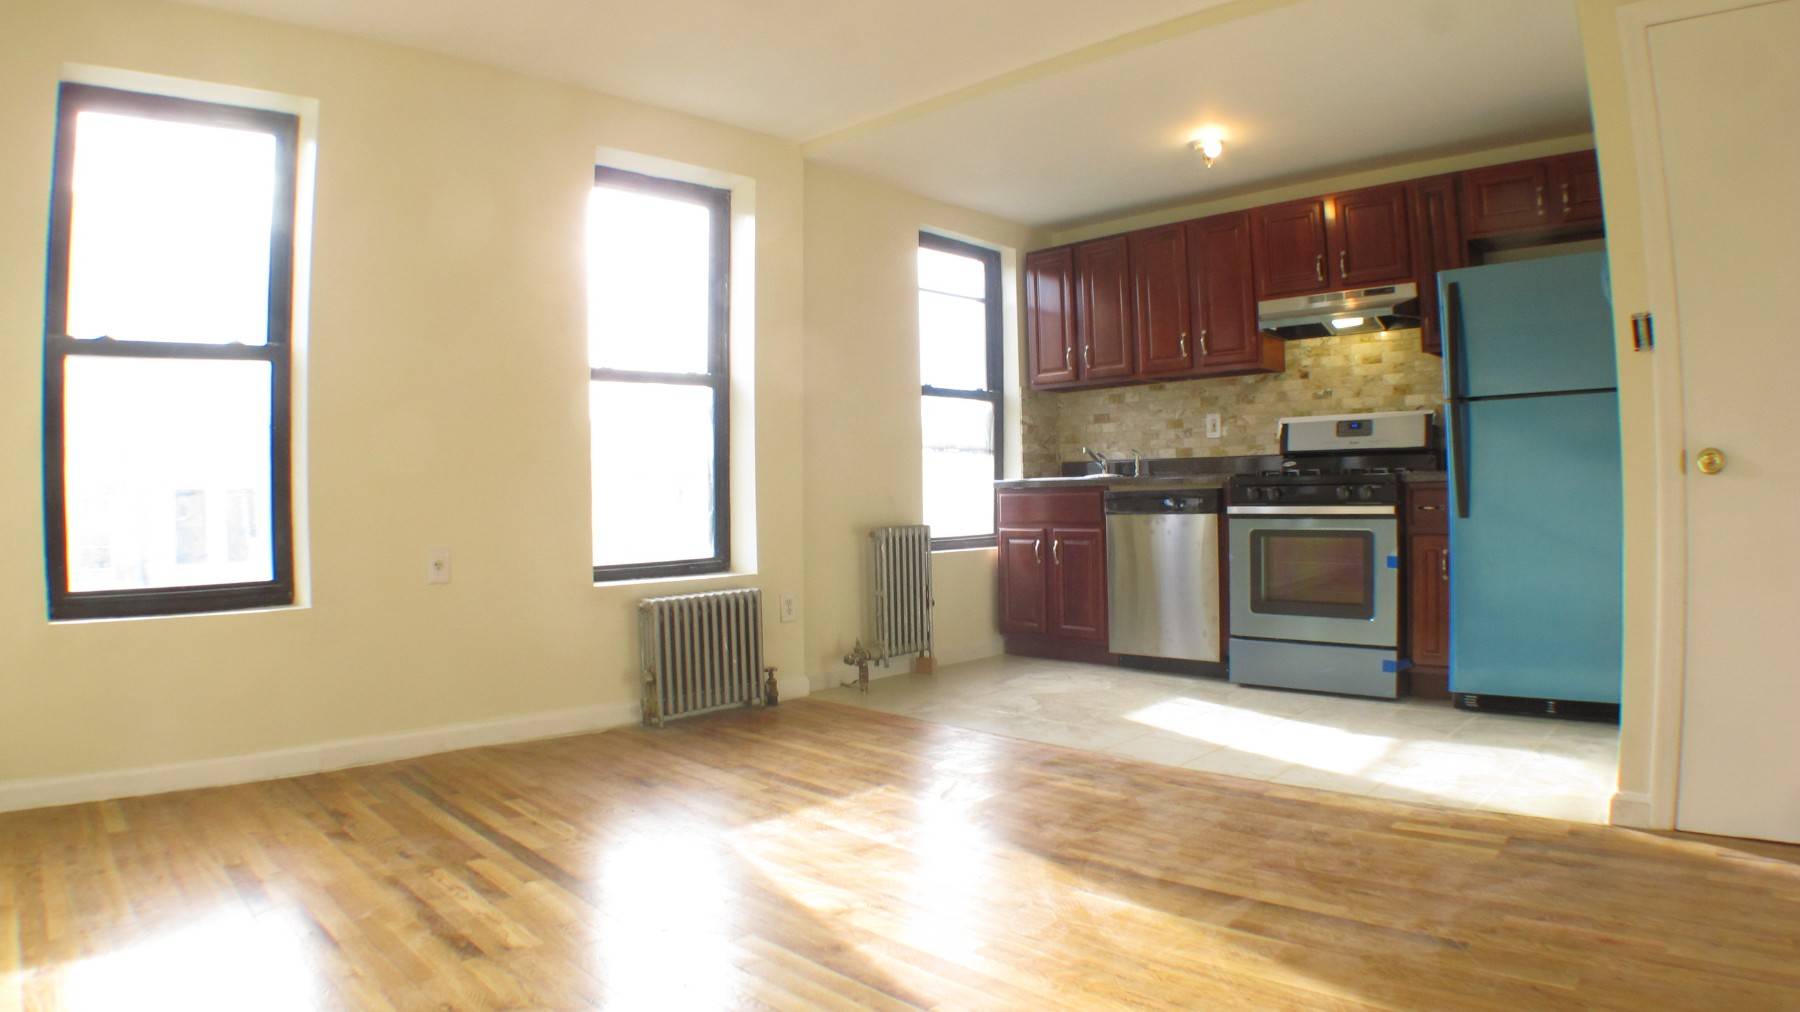 This 1. 5 Bed Apartment is conveniently located in the heart of Clinton Hill, Brooklyn.